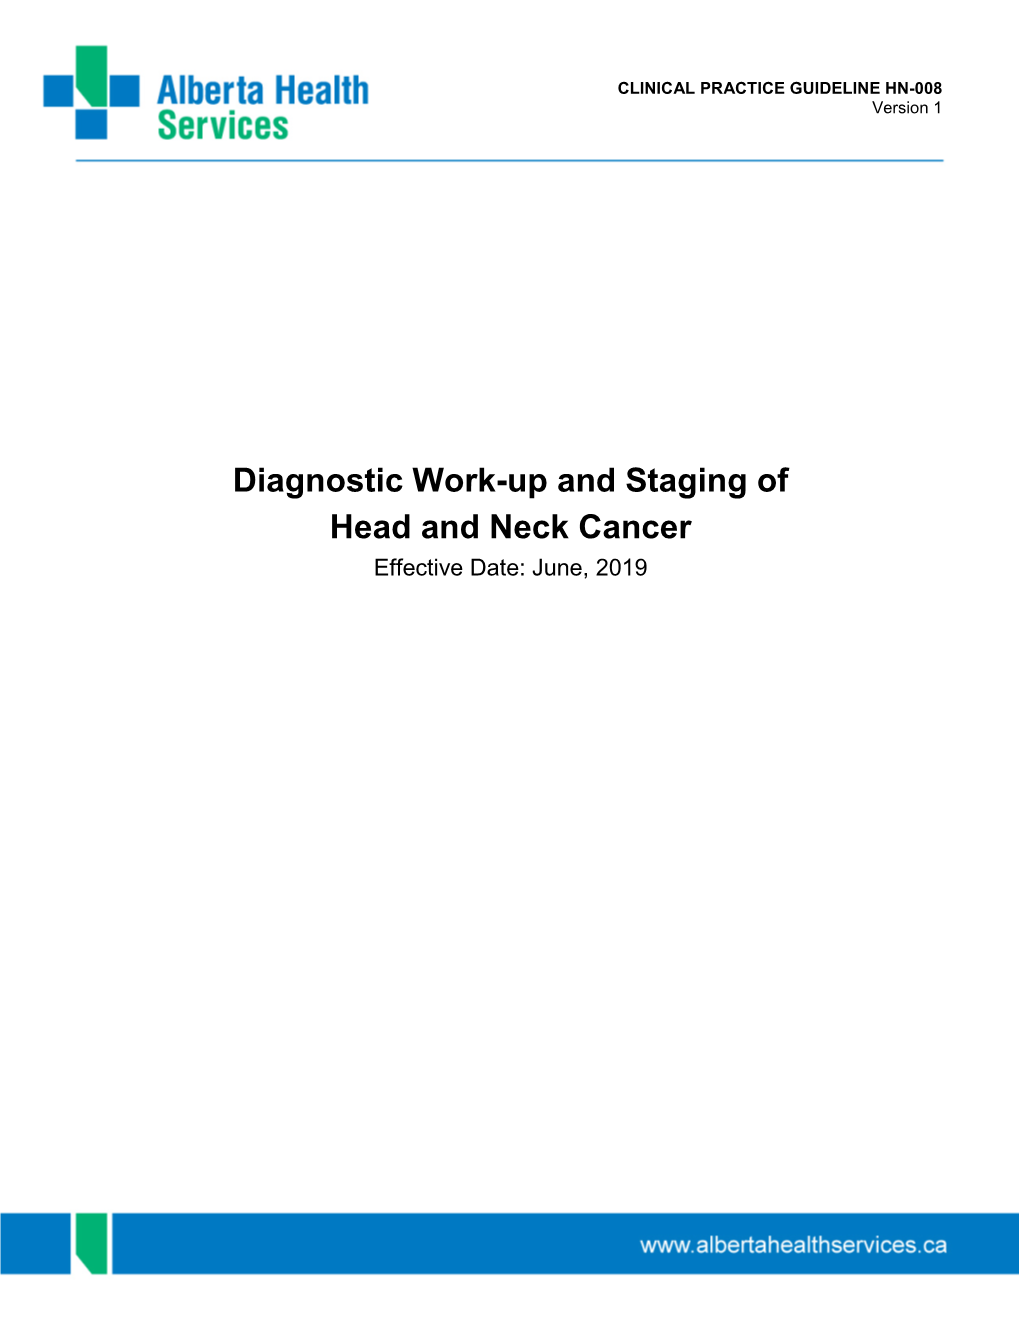 Diagnostic Workup and Staging of Head and Neck Cancer